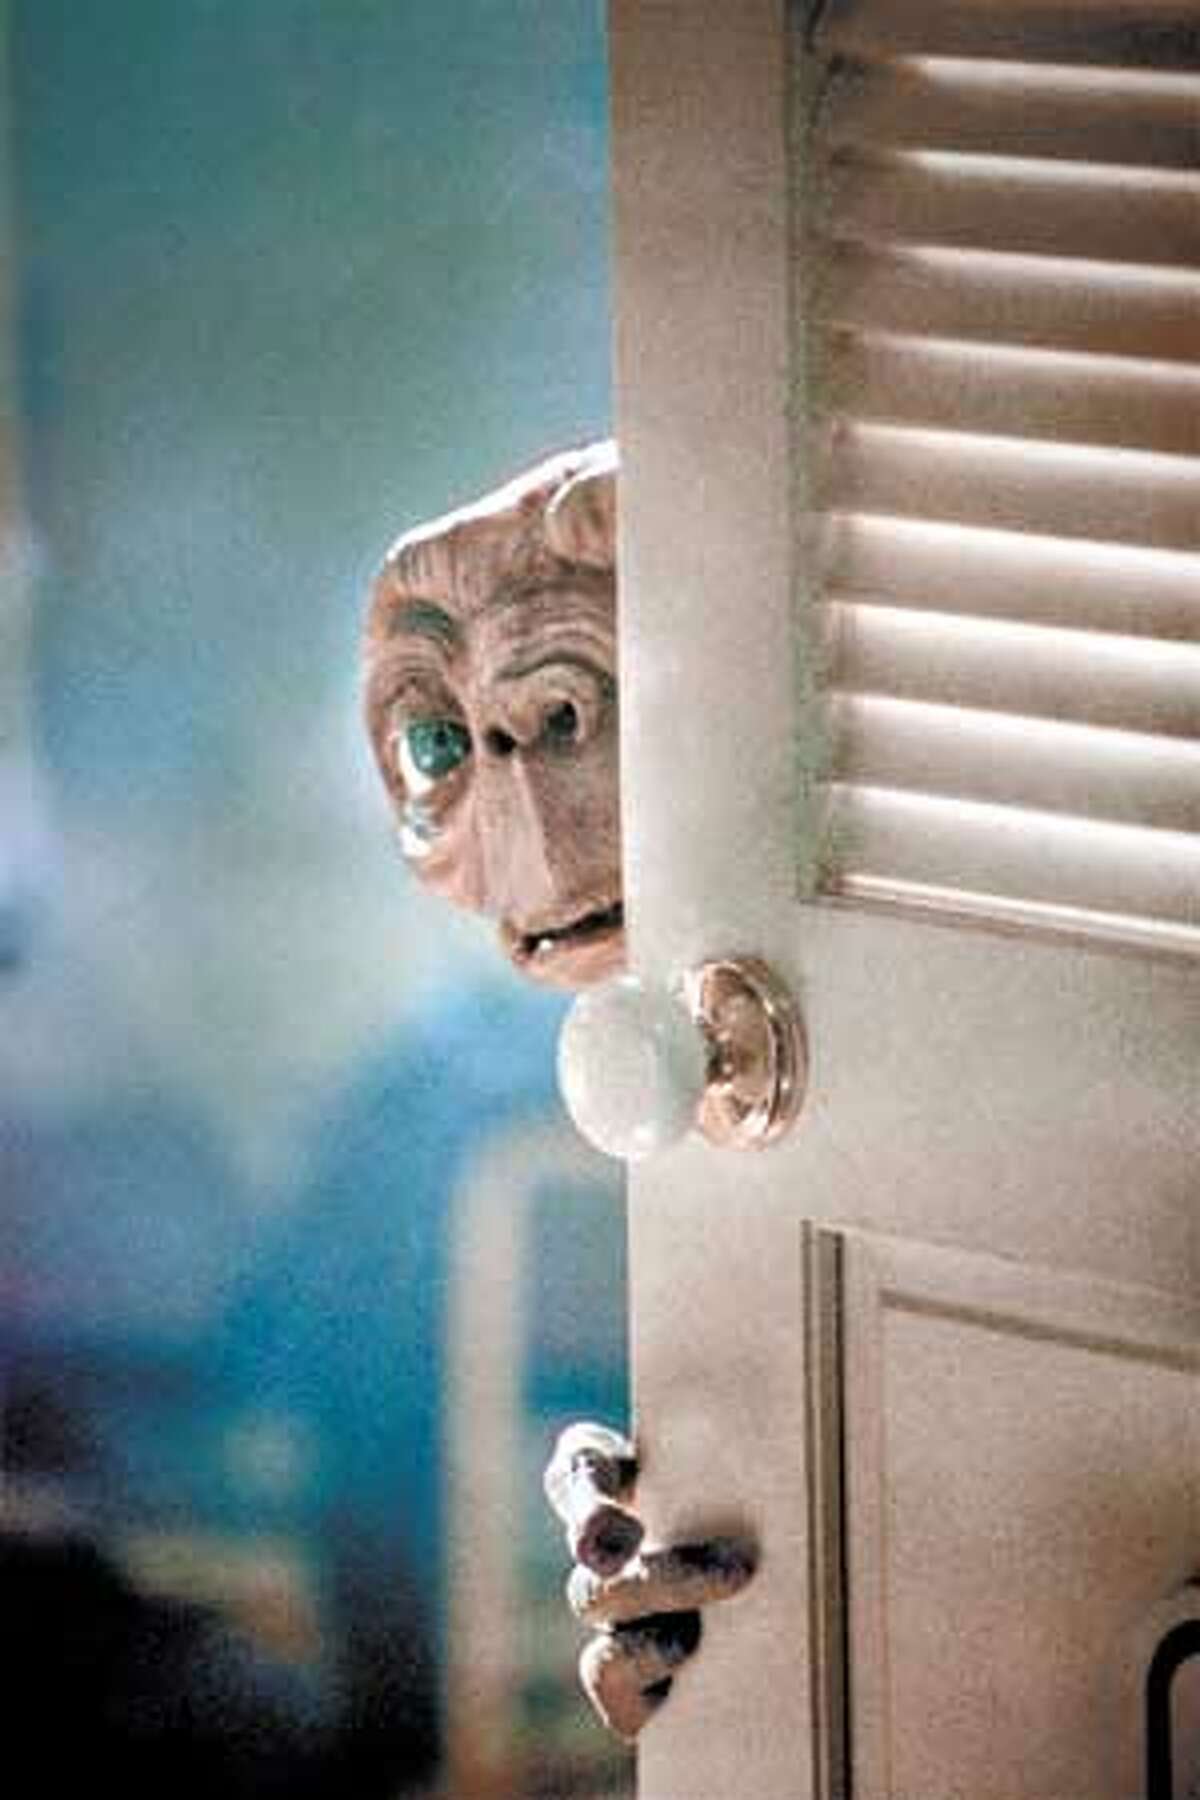 5550-K85-19AR E.T., separated from his own kind, warily explores Elliott�s house. Credit: Bruce McBroom All Rights Reserved Not For Sale or Duplication